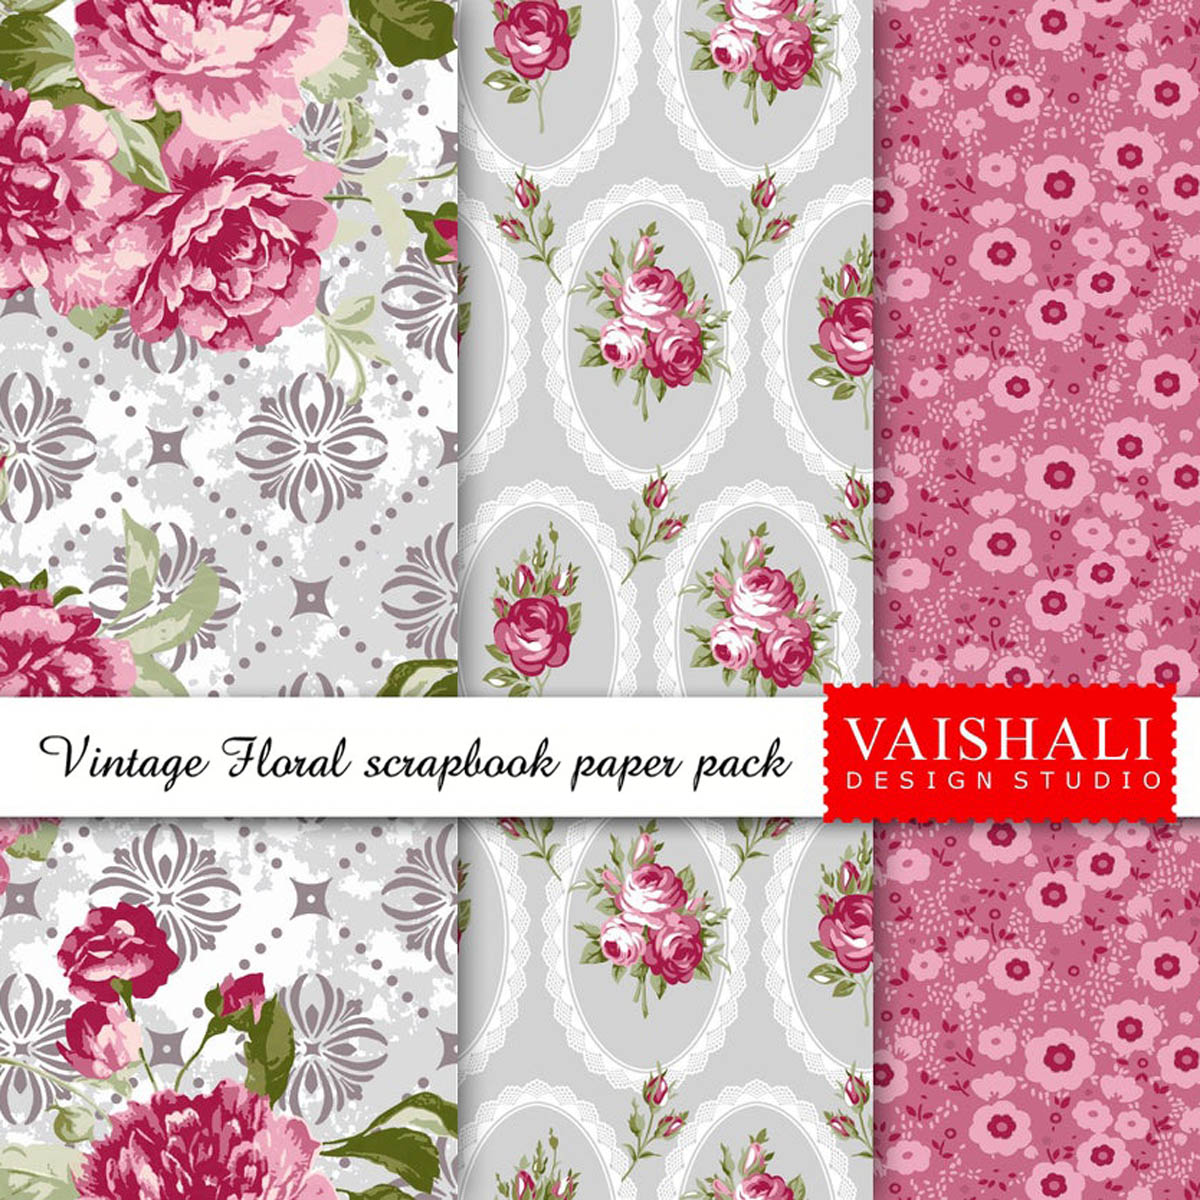 Shabby chic prints,grays with red, seamless pattern, 3 sheets, digital print downloads